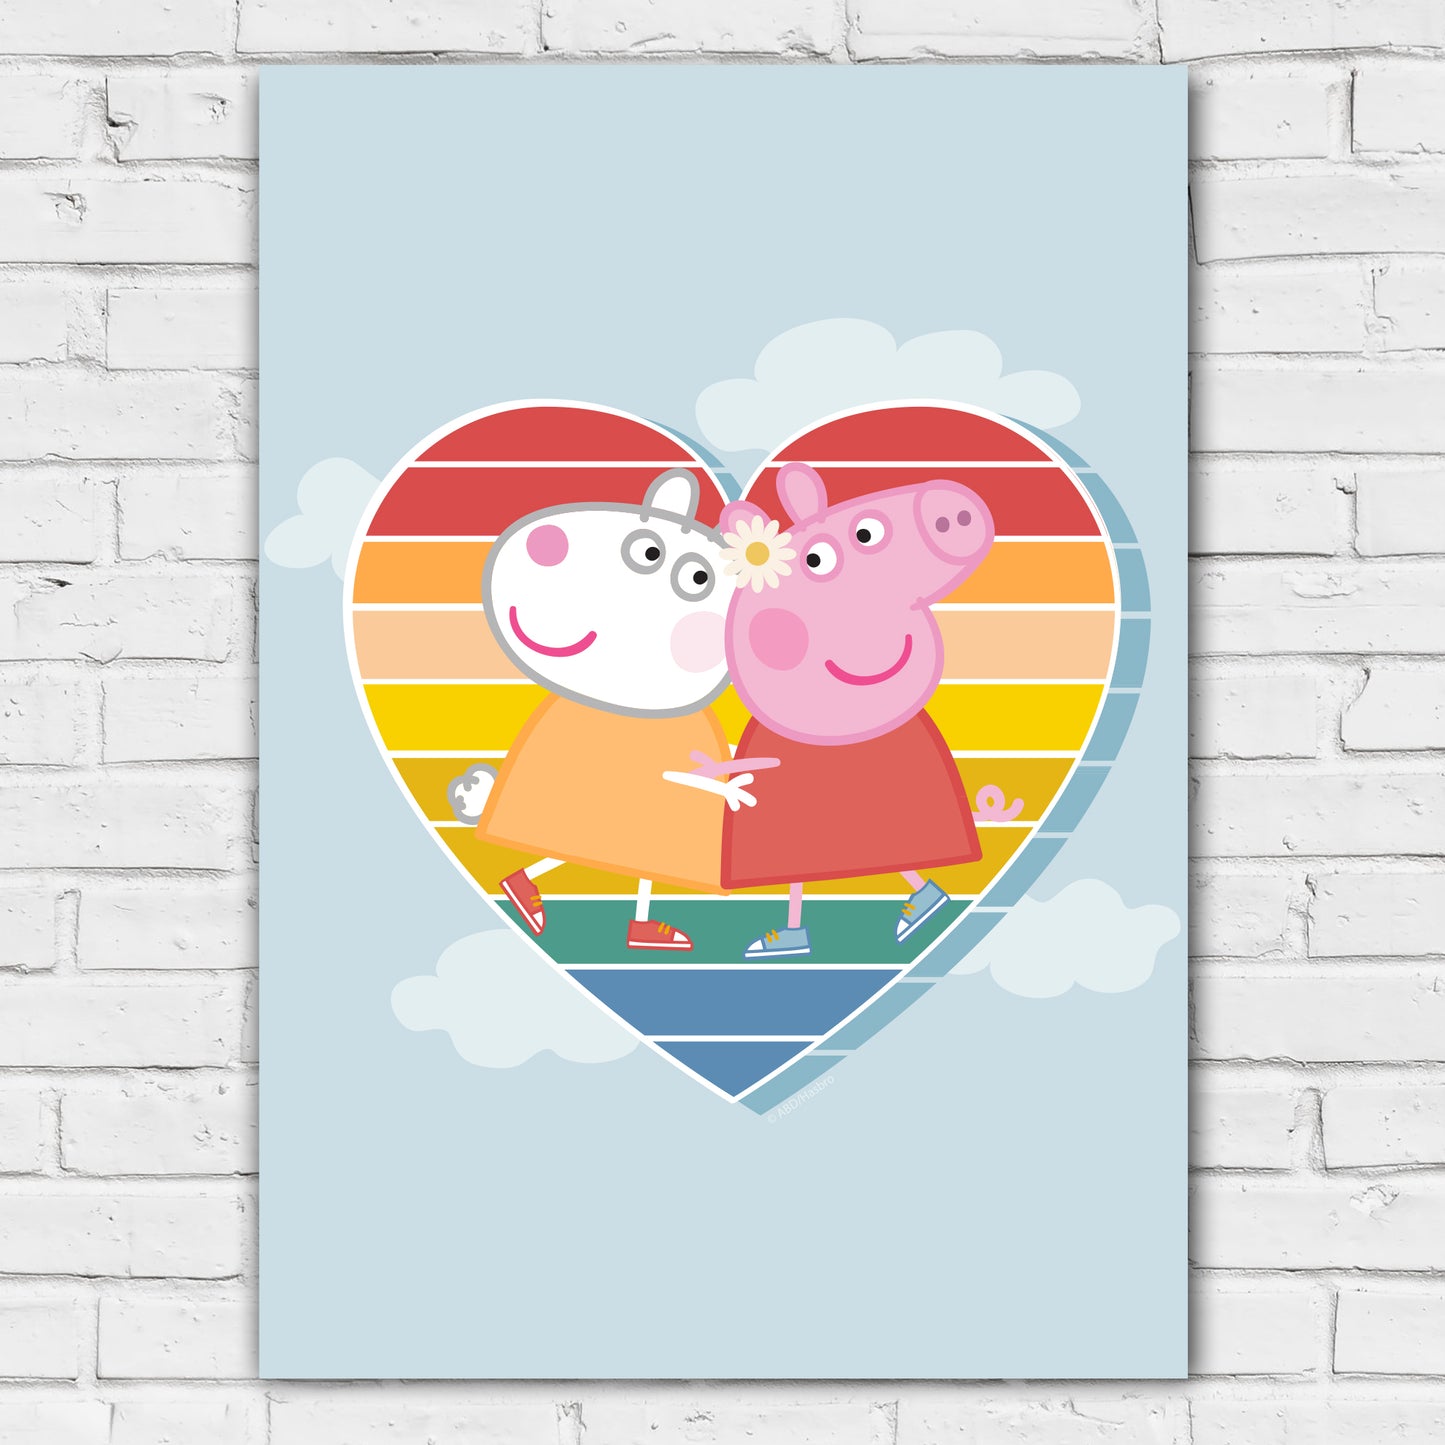 Peppa Pig Print - Peppa and Suzy Rainbow Heart and Clouds Poster Wall Art